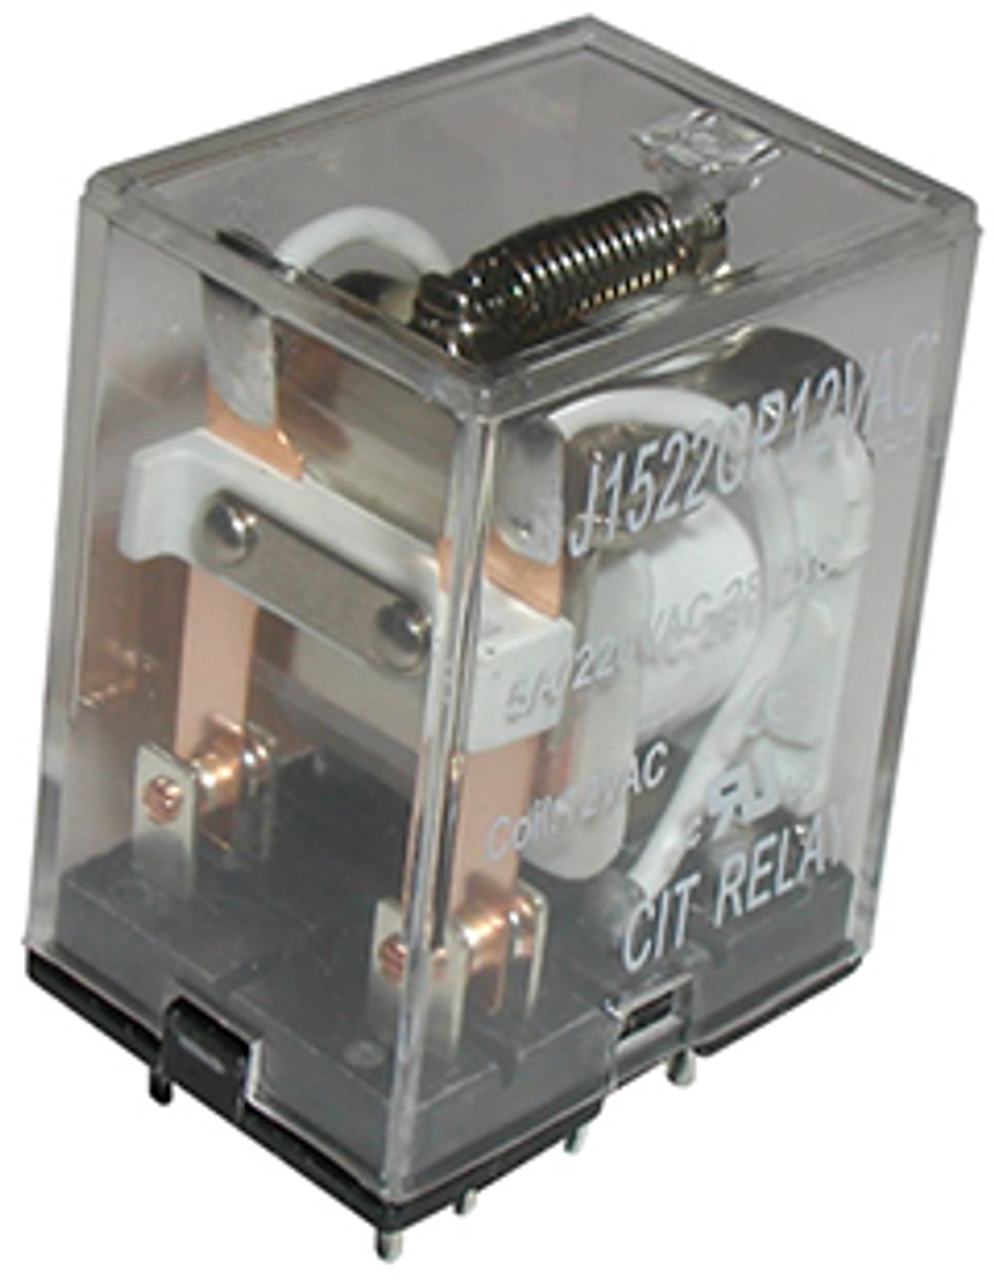 CIT Relay and Switch J1524CP110VDCT Industrial Relays